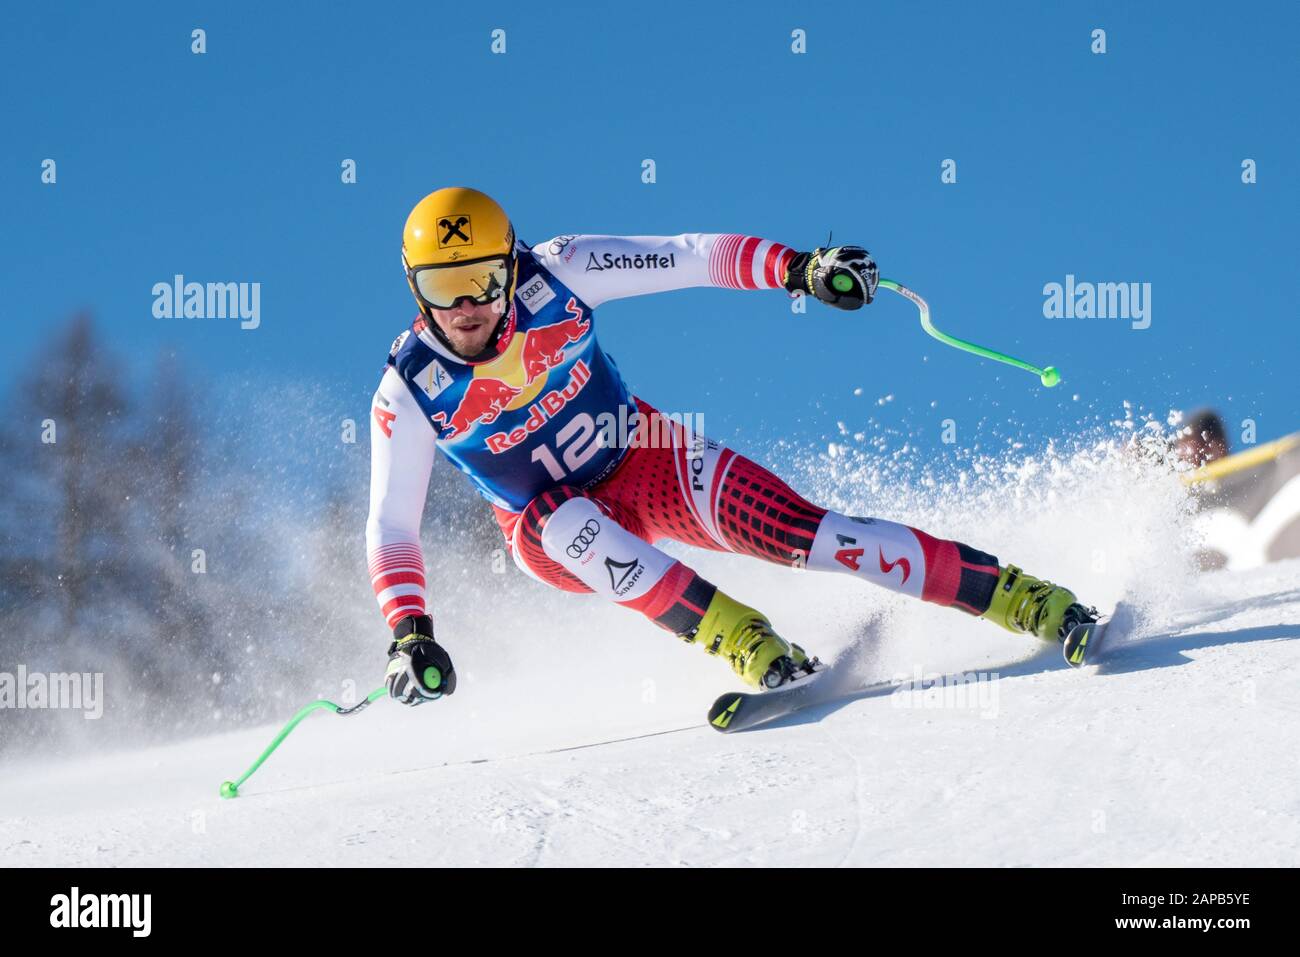 Max Franz of Austria at the Ski Alpin: 80. Hahnenkamm Race 2020 - Audi FIS Alpine Ski World Cup - Men's Downhill Training at the Streif on January 22, 2020 in Kitzbuehel, AUSTRIA. (Photo by Horst Ettensberger/ESPA-Images) Stock Photo